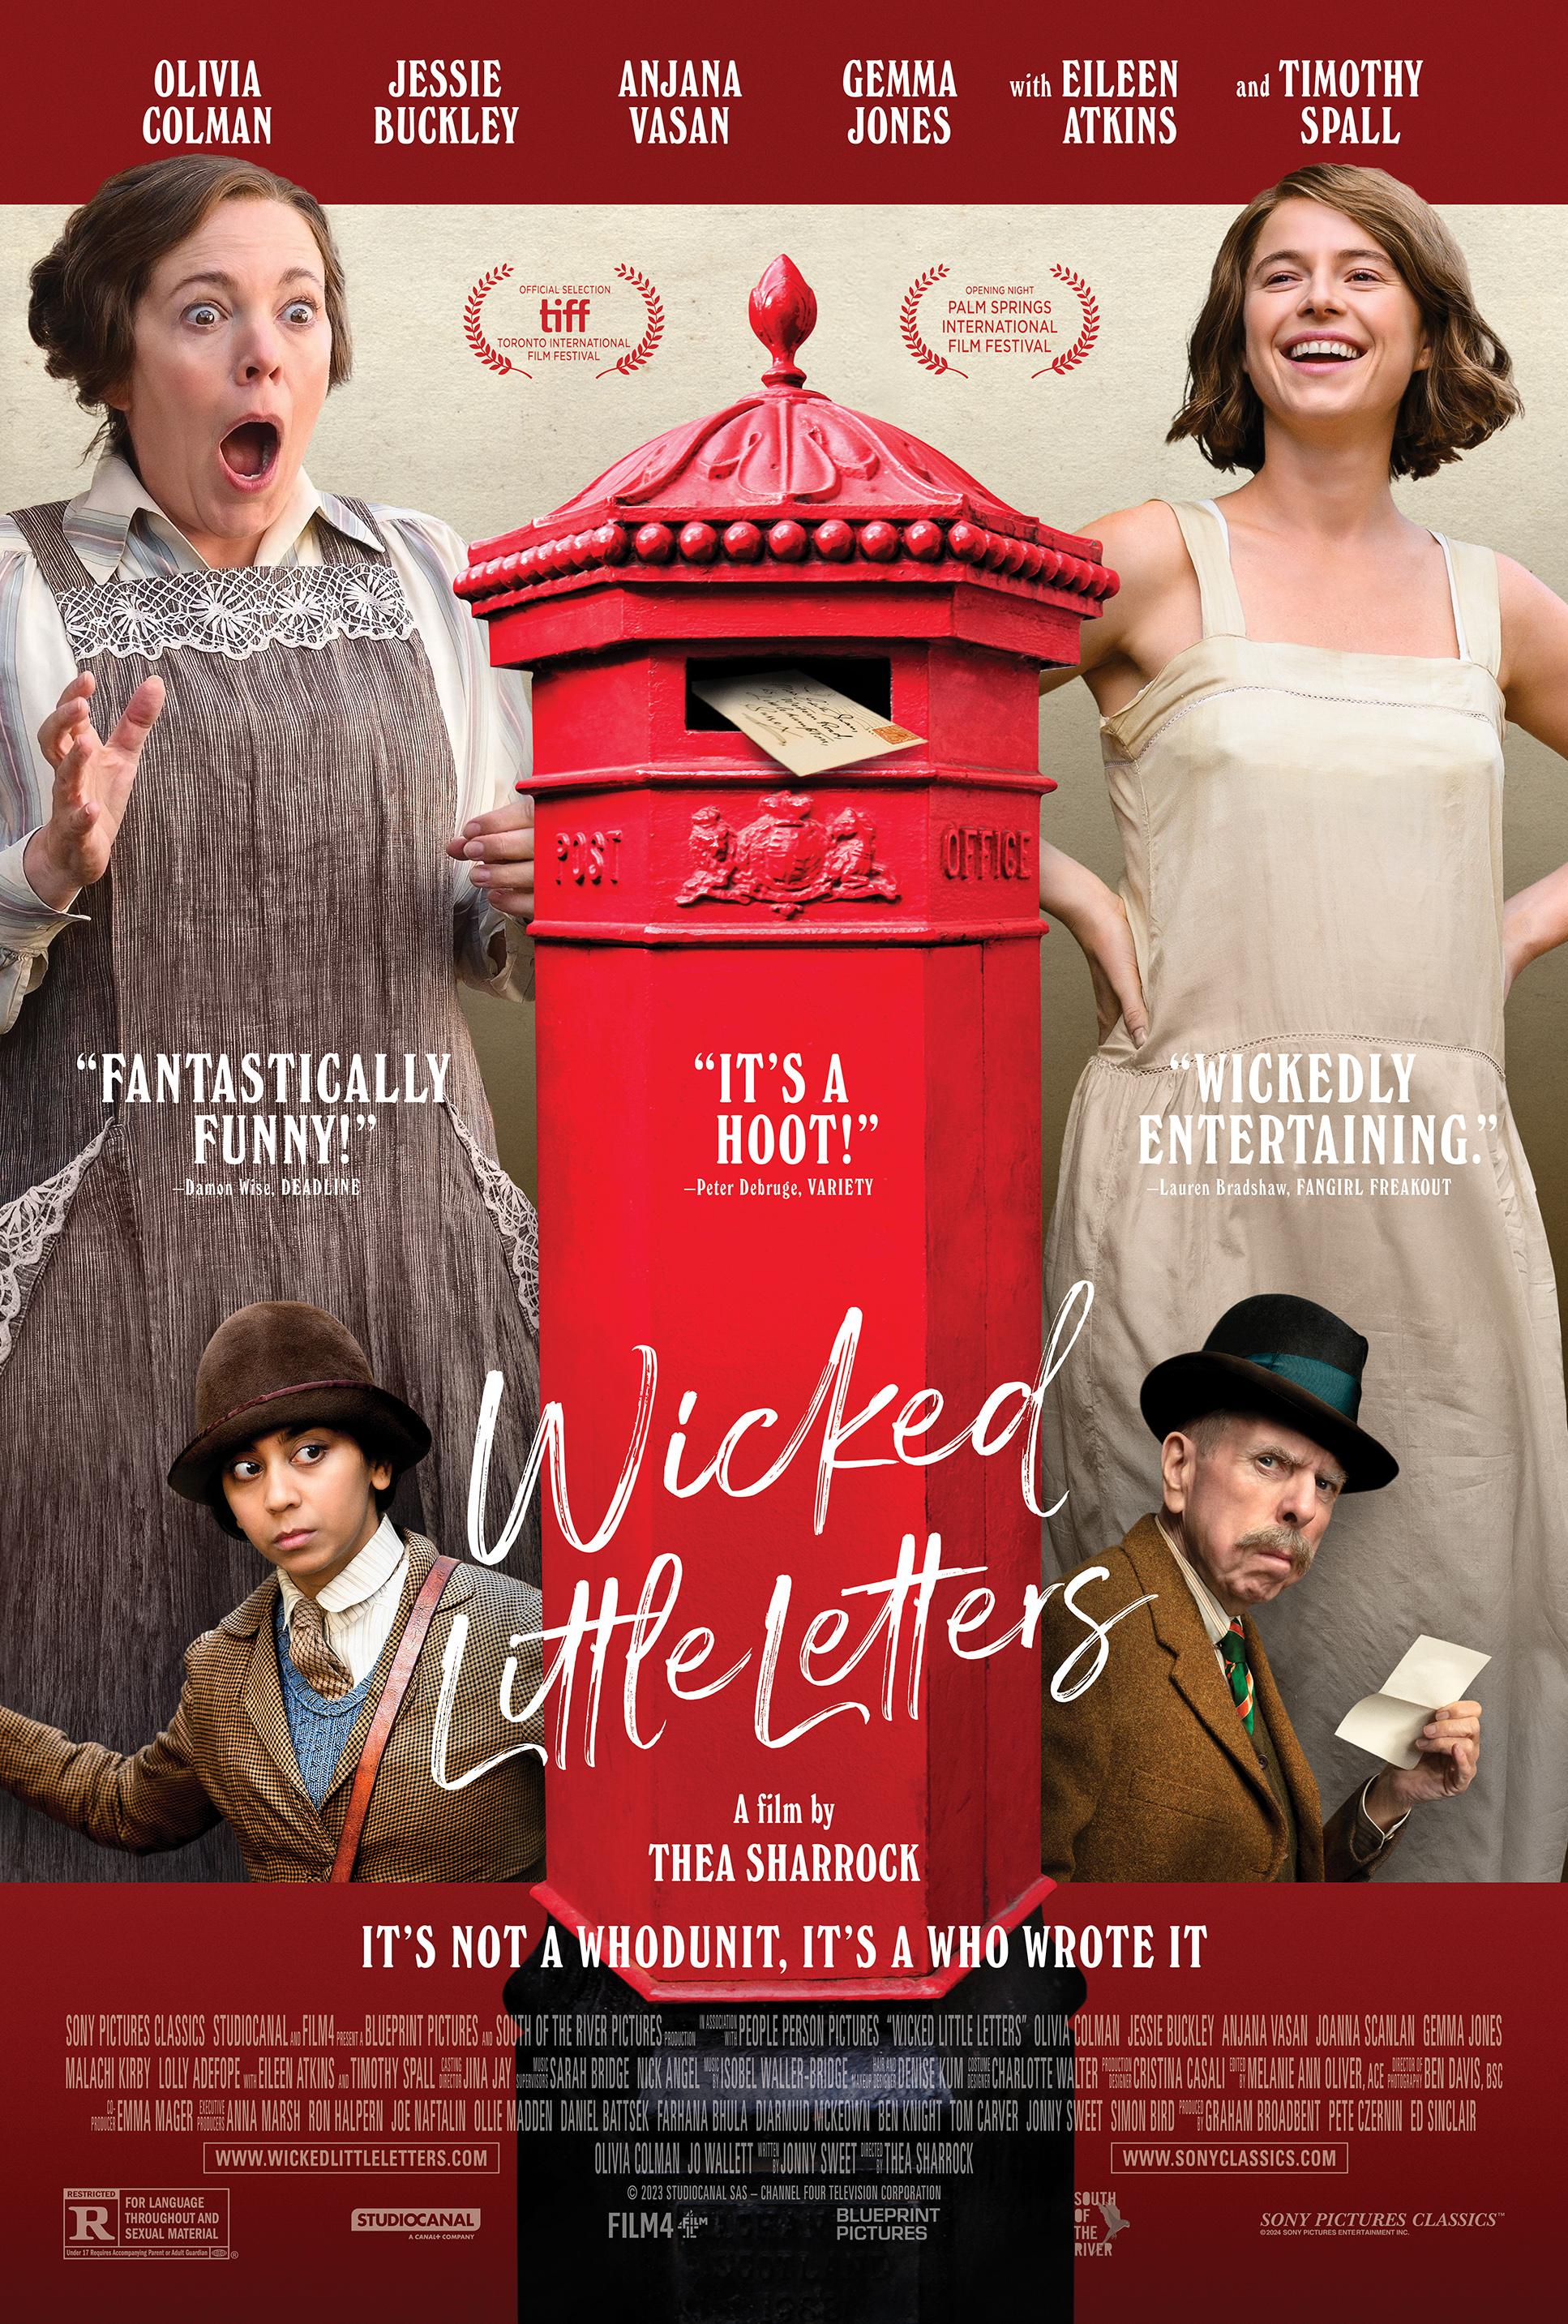 Timothy Spall, Olivia Colman, Jessie Buckley, and Anjana Vasan in Wicked Little Letters (2023)